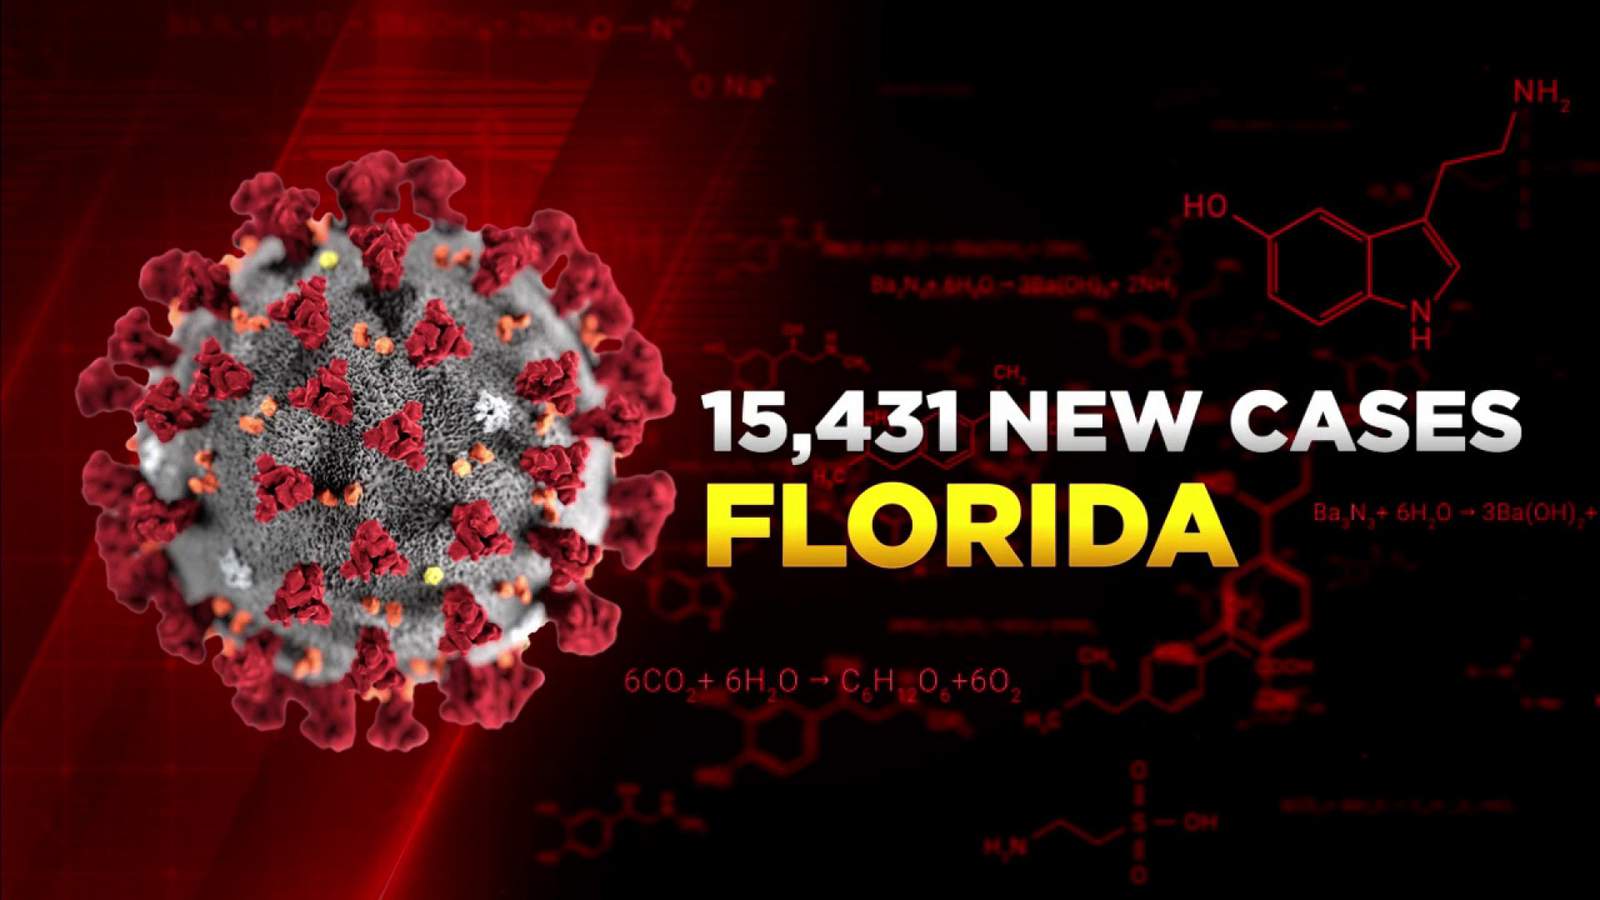 Florida reports 15,431 new cases of coronavirus on Tuesday, the second highest total in the pandemic